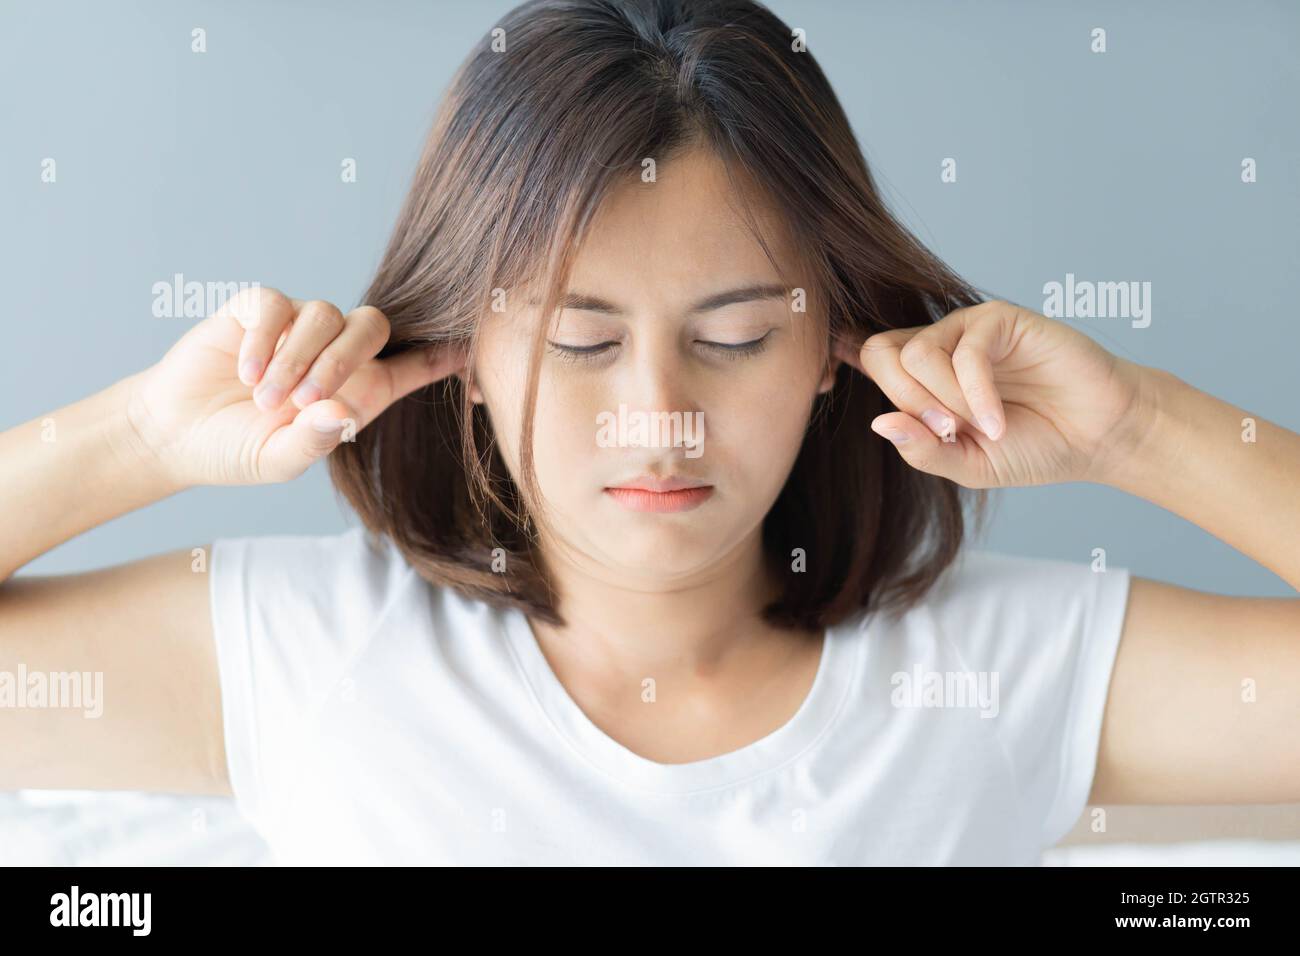 Close-up Of Angry Woman Covering Ears At Home Stock Photo